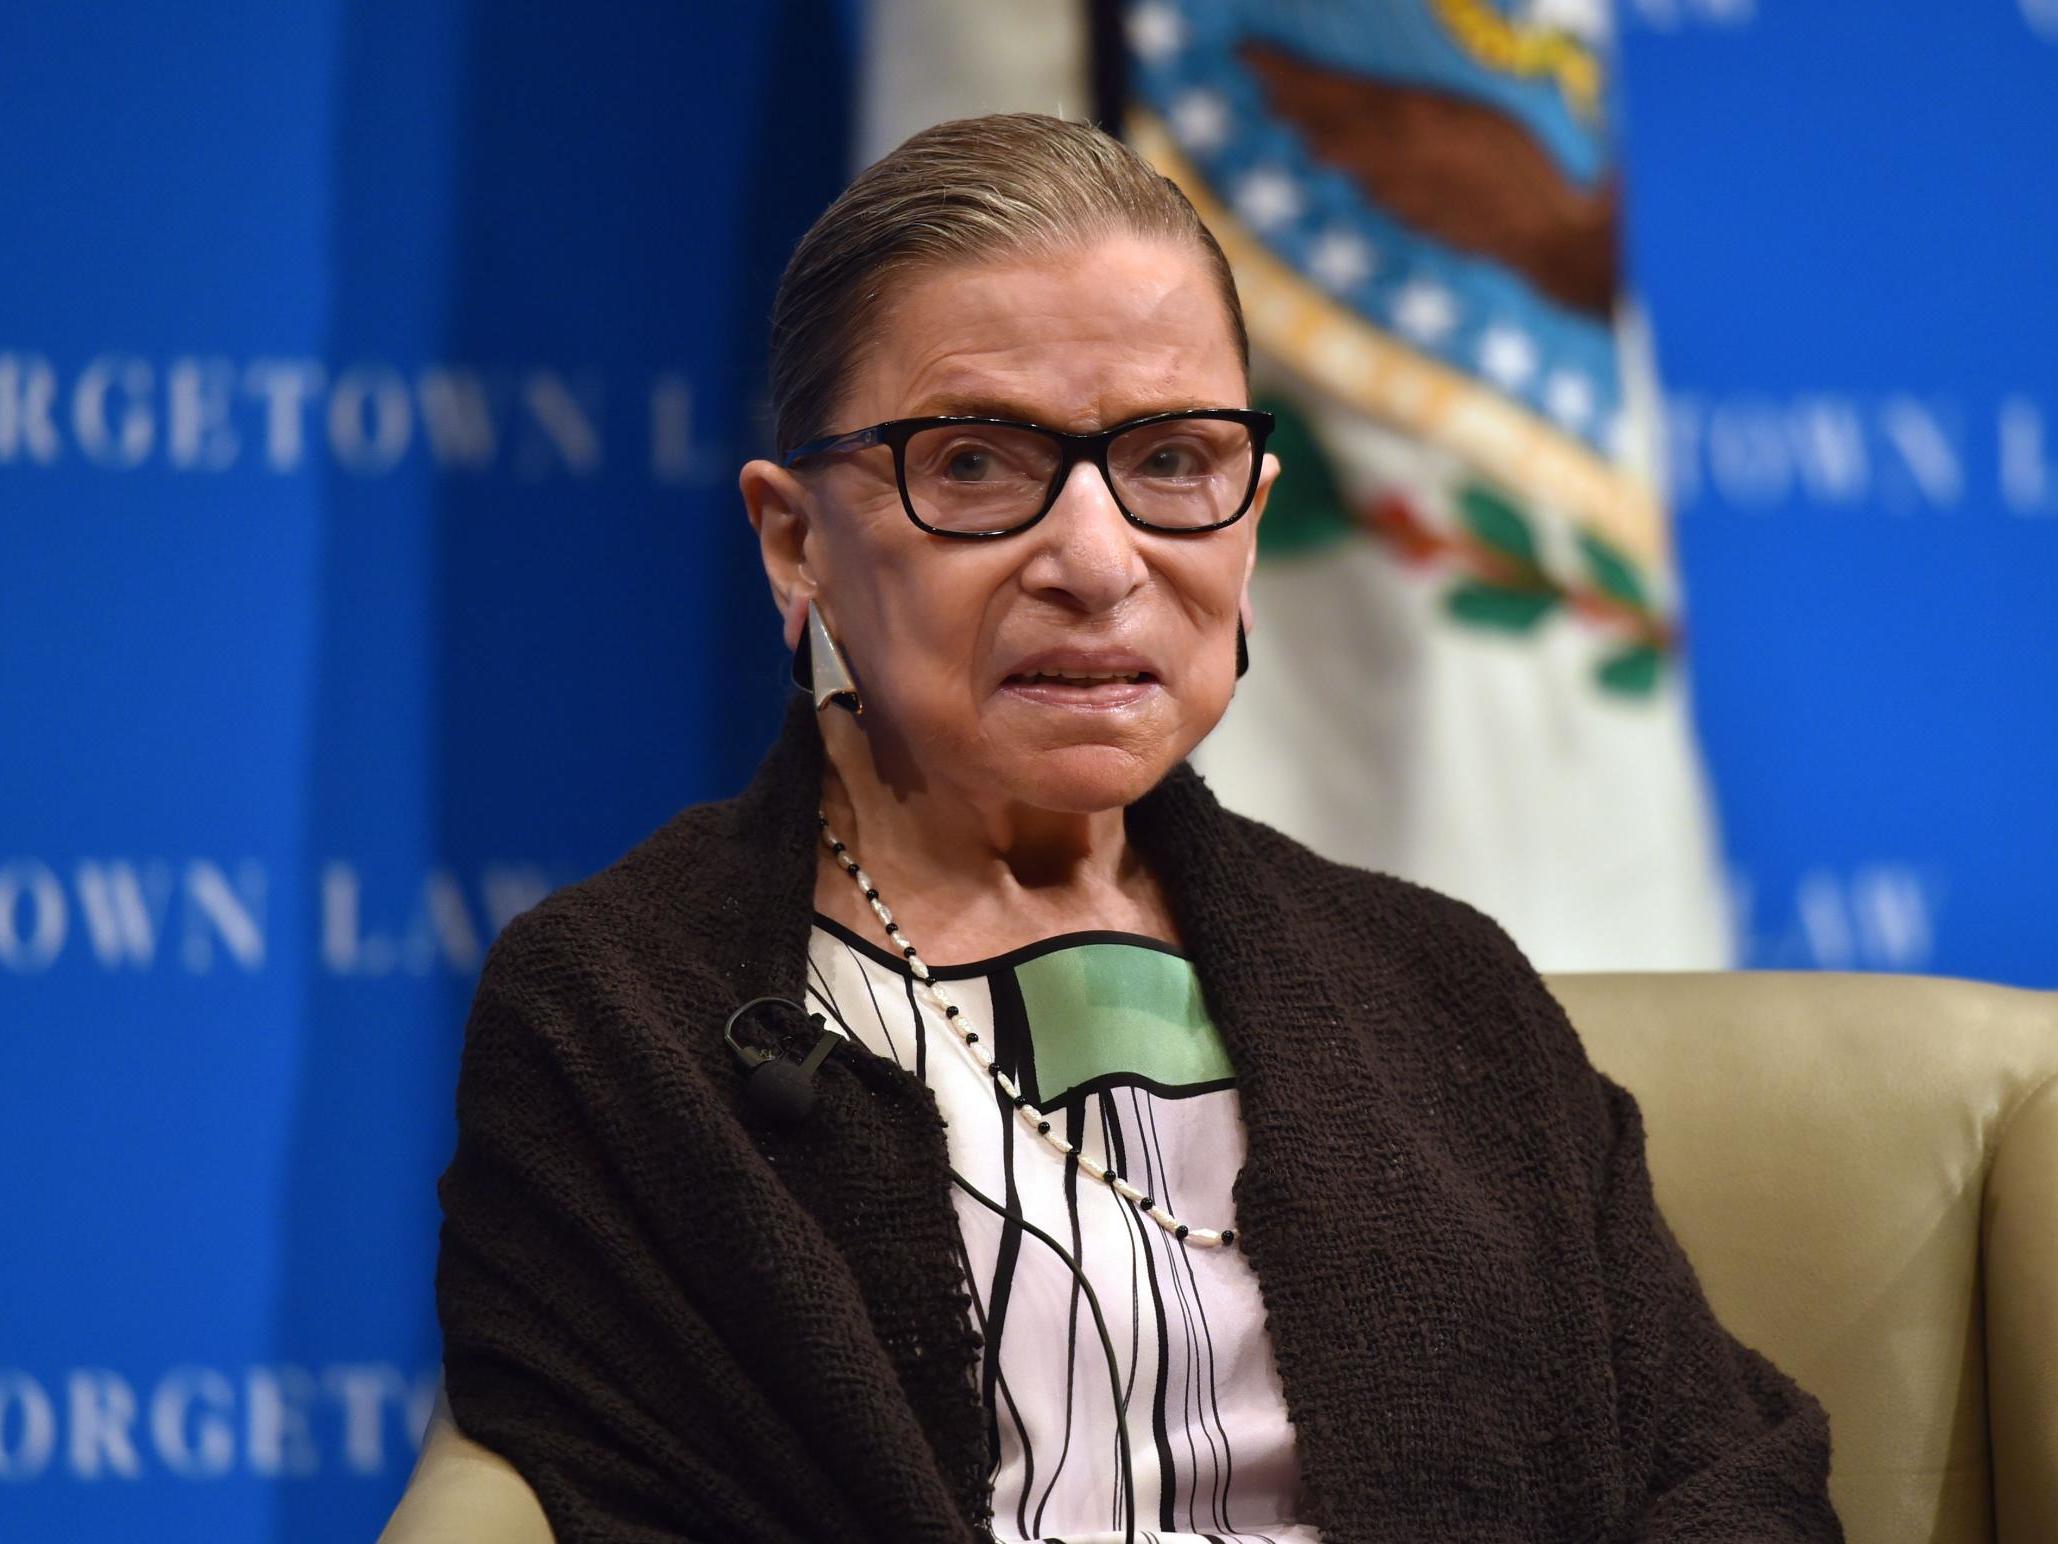 Ruth Bader Ginsburg misses Supreme Court hearings due to illness